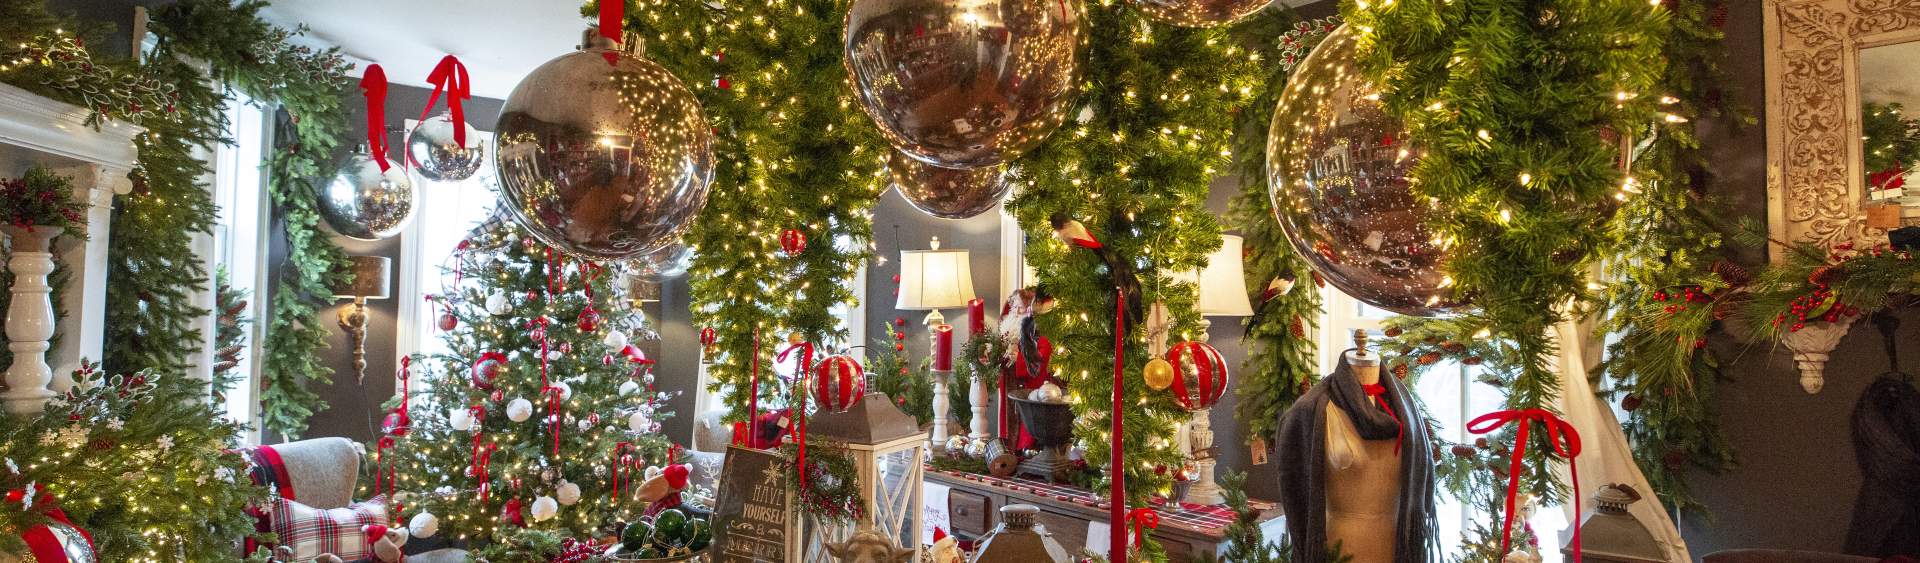 Where to find cheap Christmas decorations: Score deals before holidays